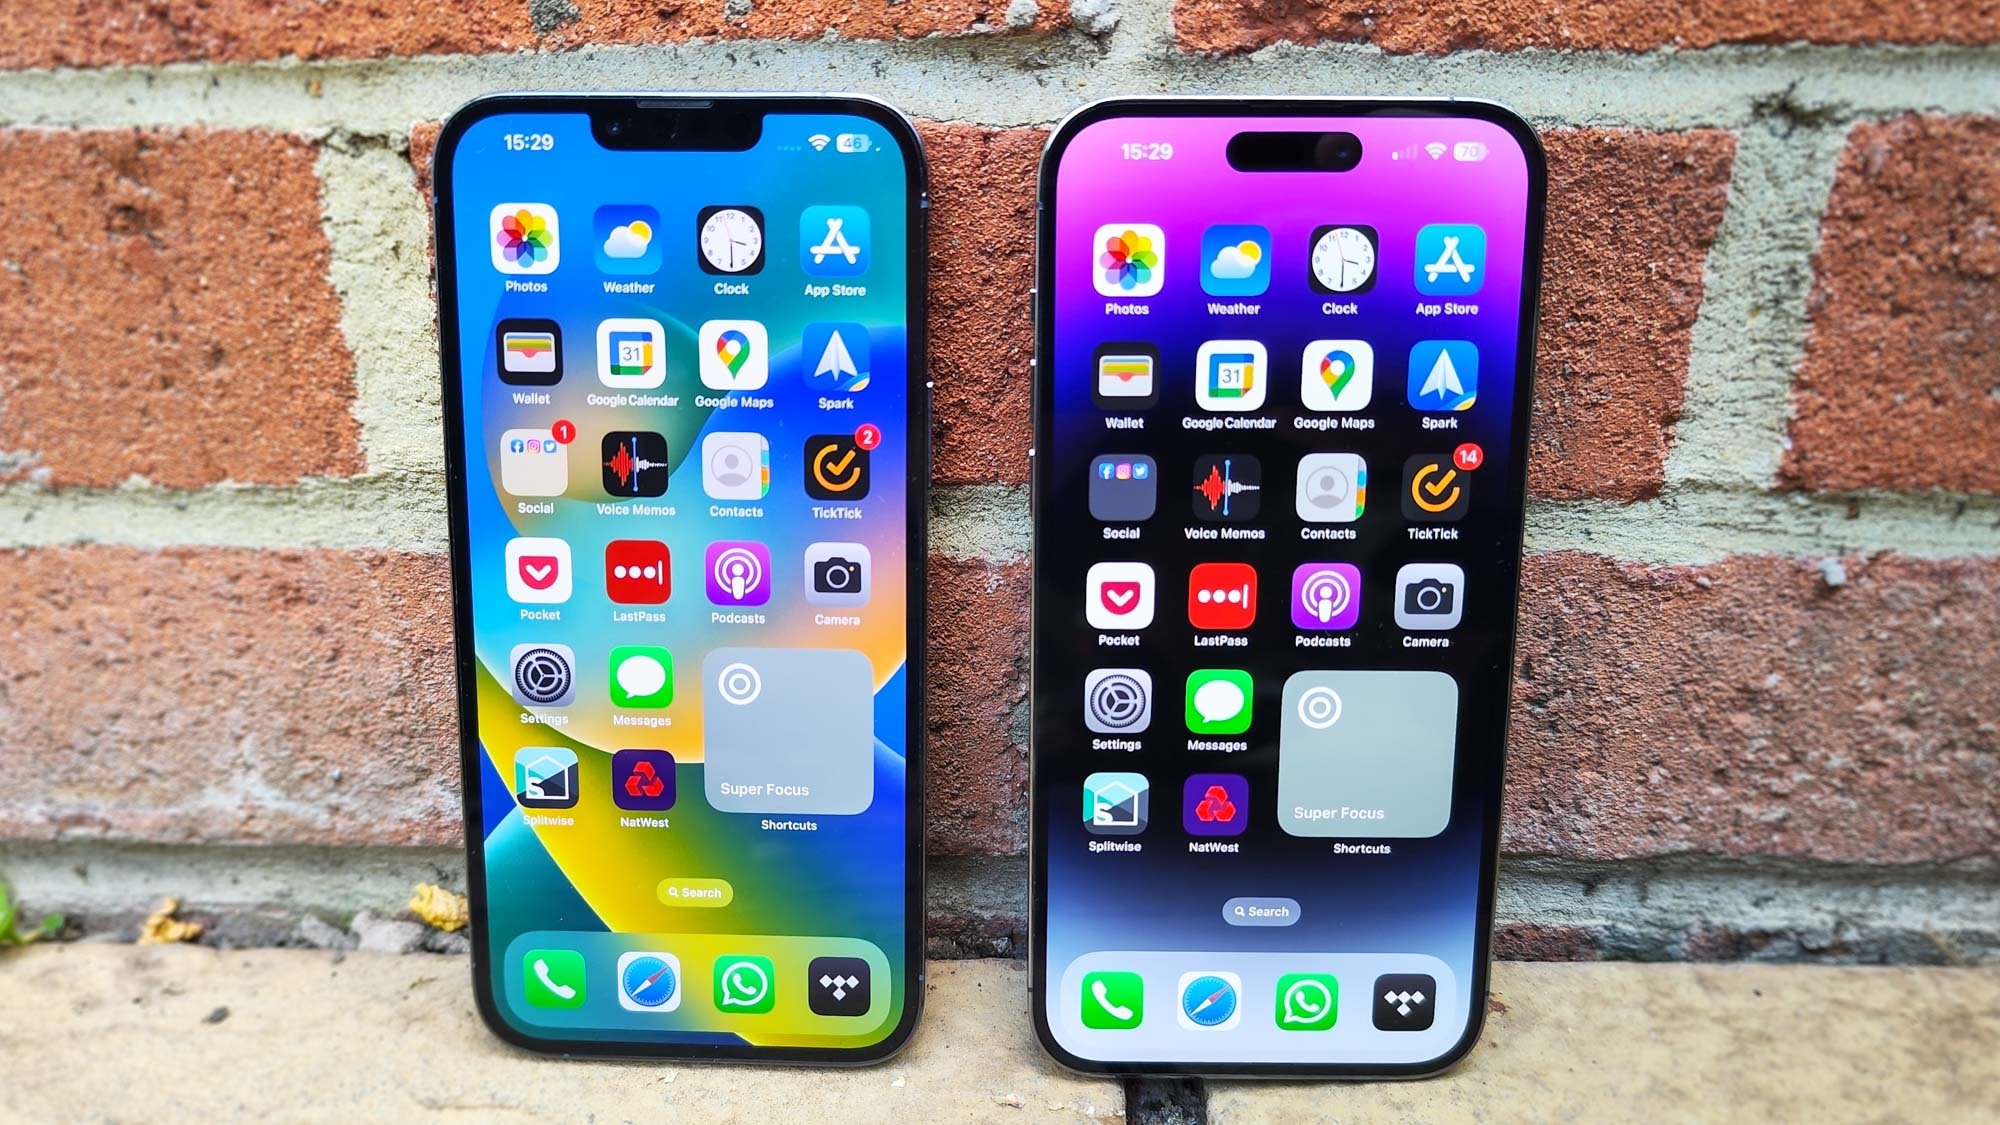 Apple iPhone 14 Pro Max vs iPhone 13 Pro Max: Which should you